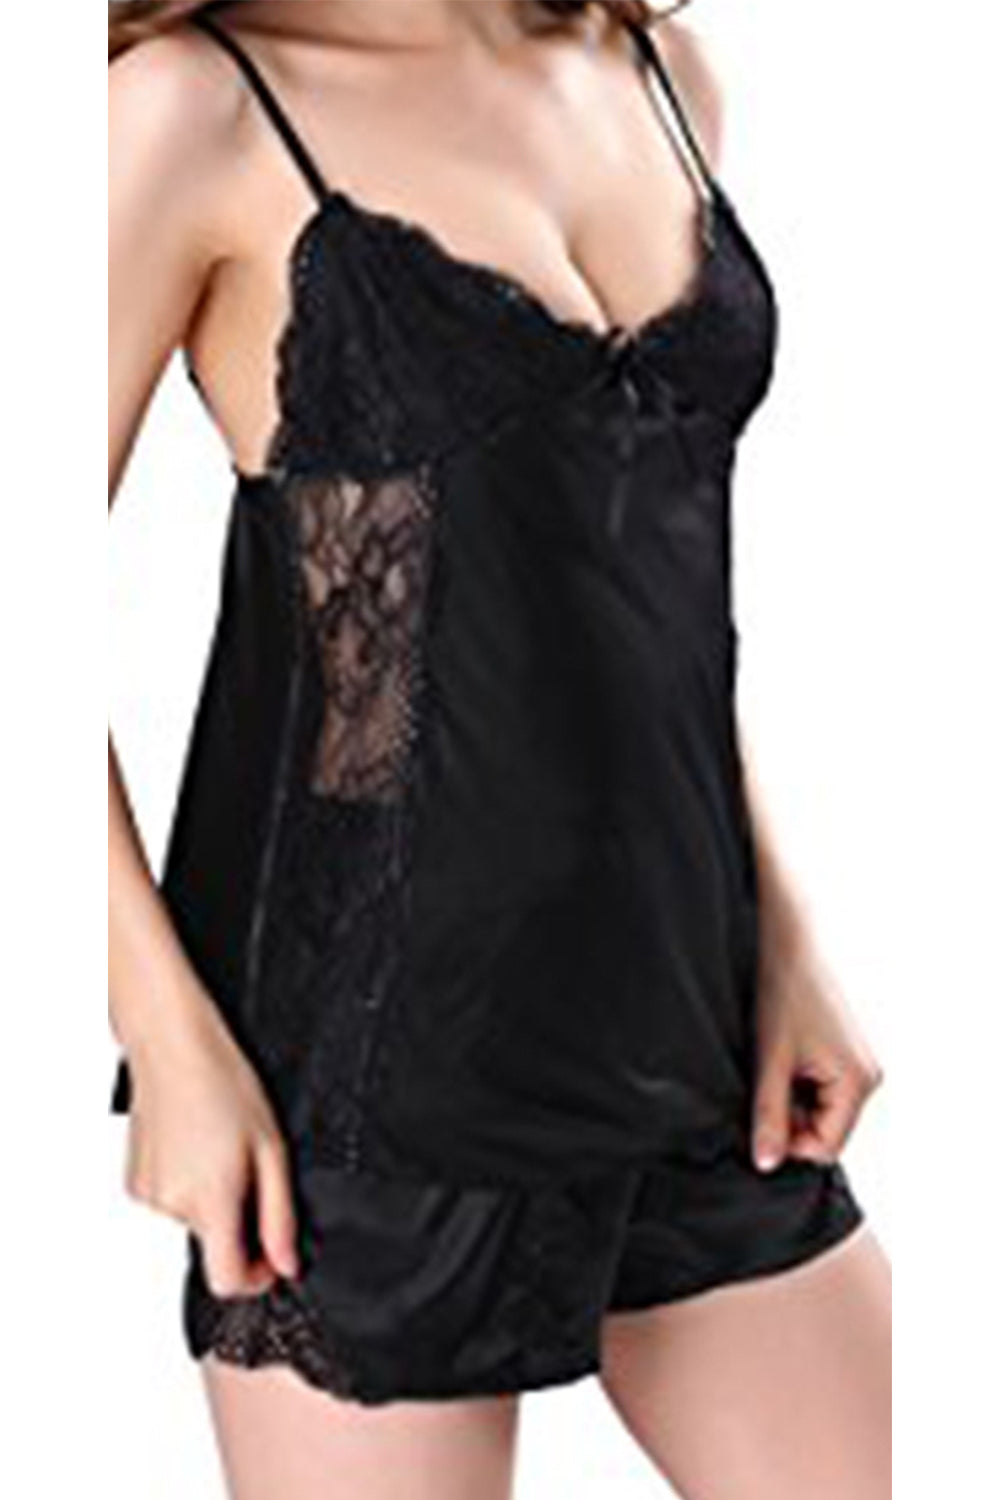 Ketty More Women Silk And Lace Decorated Two Piece Nighty Lingerie-KMWL912